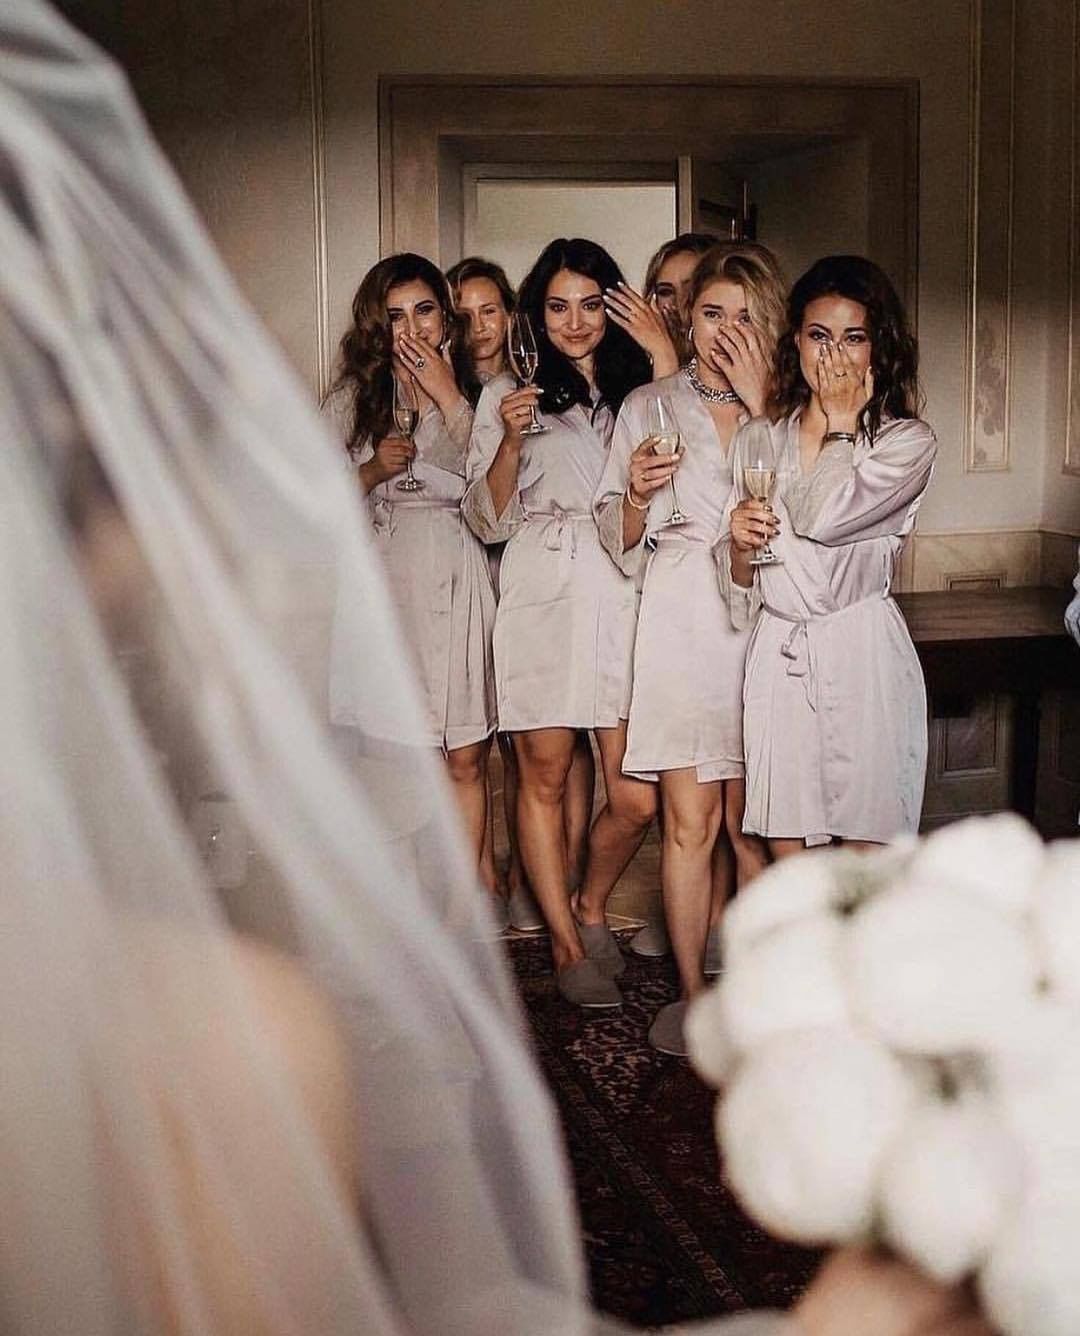 Wedding Dresses Gallery on Instagram: “The morning where dreams become reality ?Tag your girls to see if they like this … ⠀ ⠀ Photo by @kreativwedding ⠀ ⠀ #bridesmaid…”